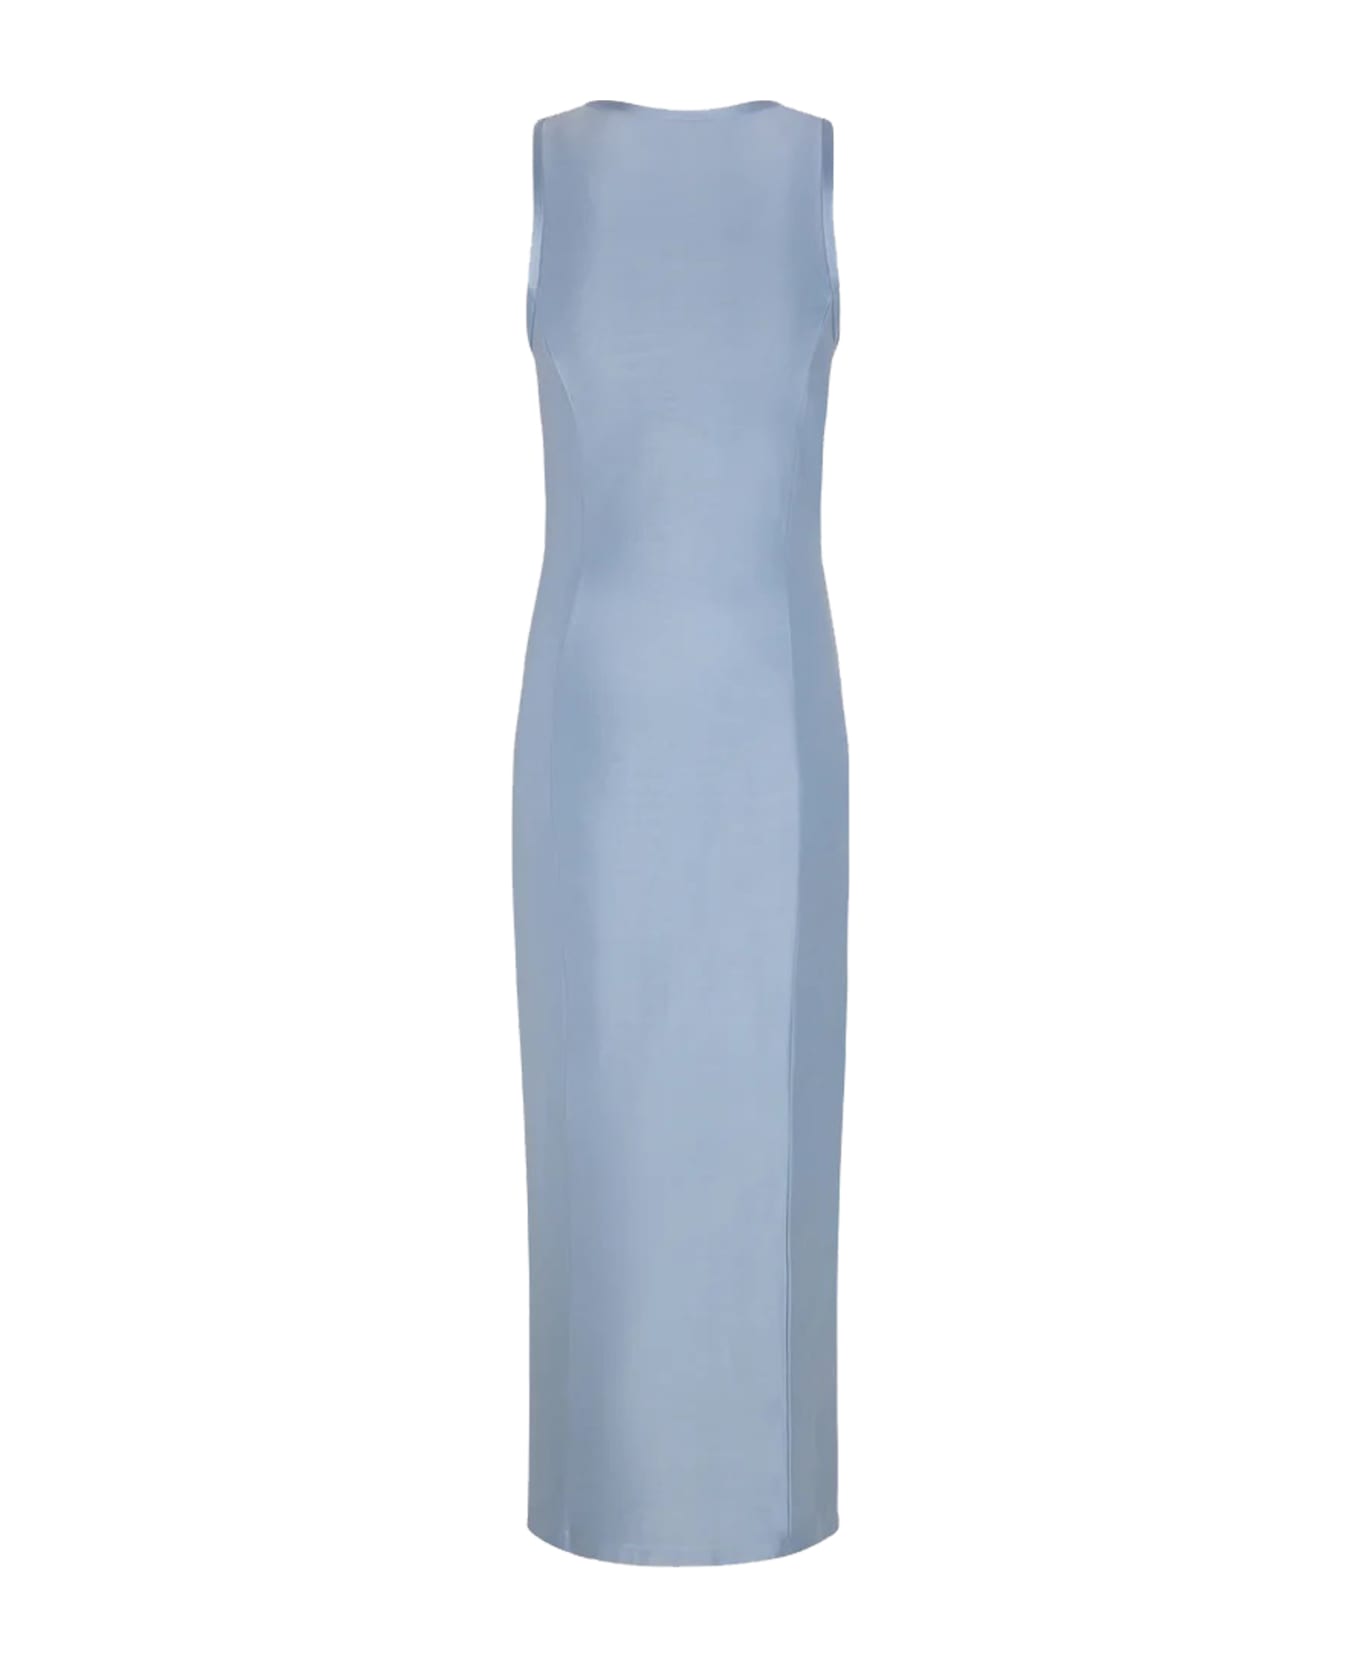 Paco Rabanne Button-sided Slim Tank Dress - Faded Blue